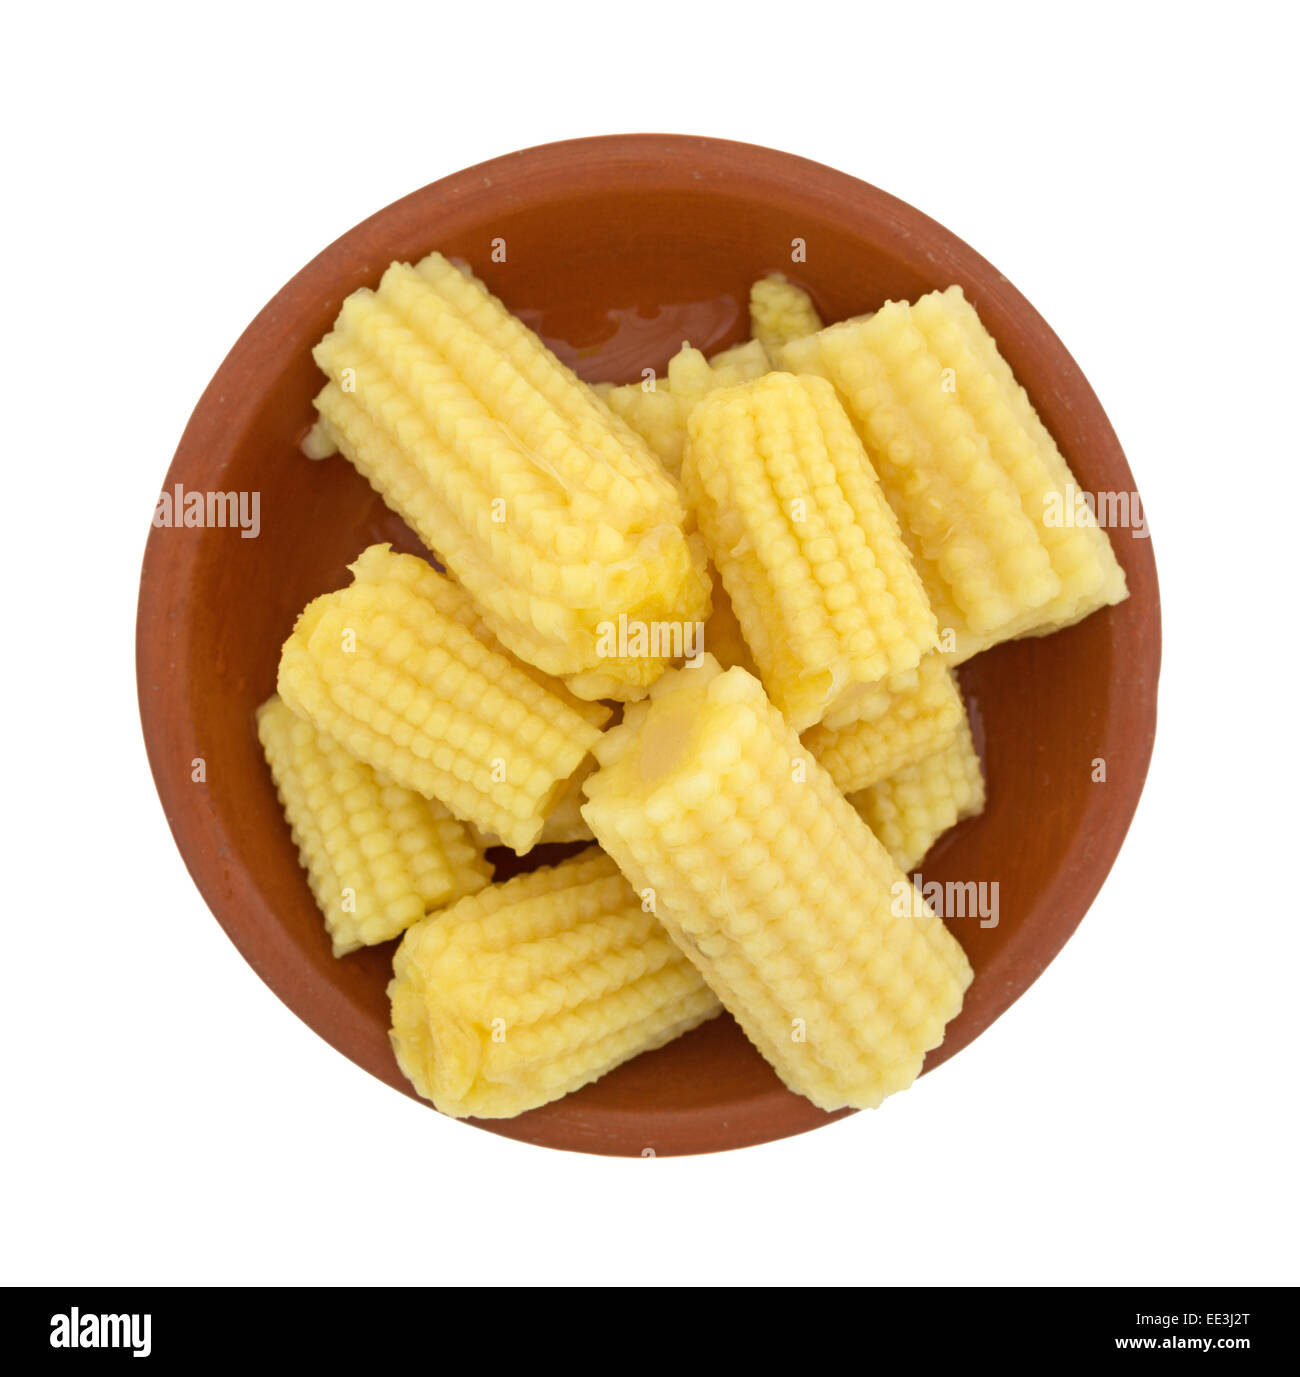 Top view of a small bowl of corn nuggets on a white background. Stock Photo